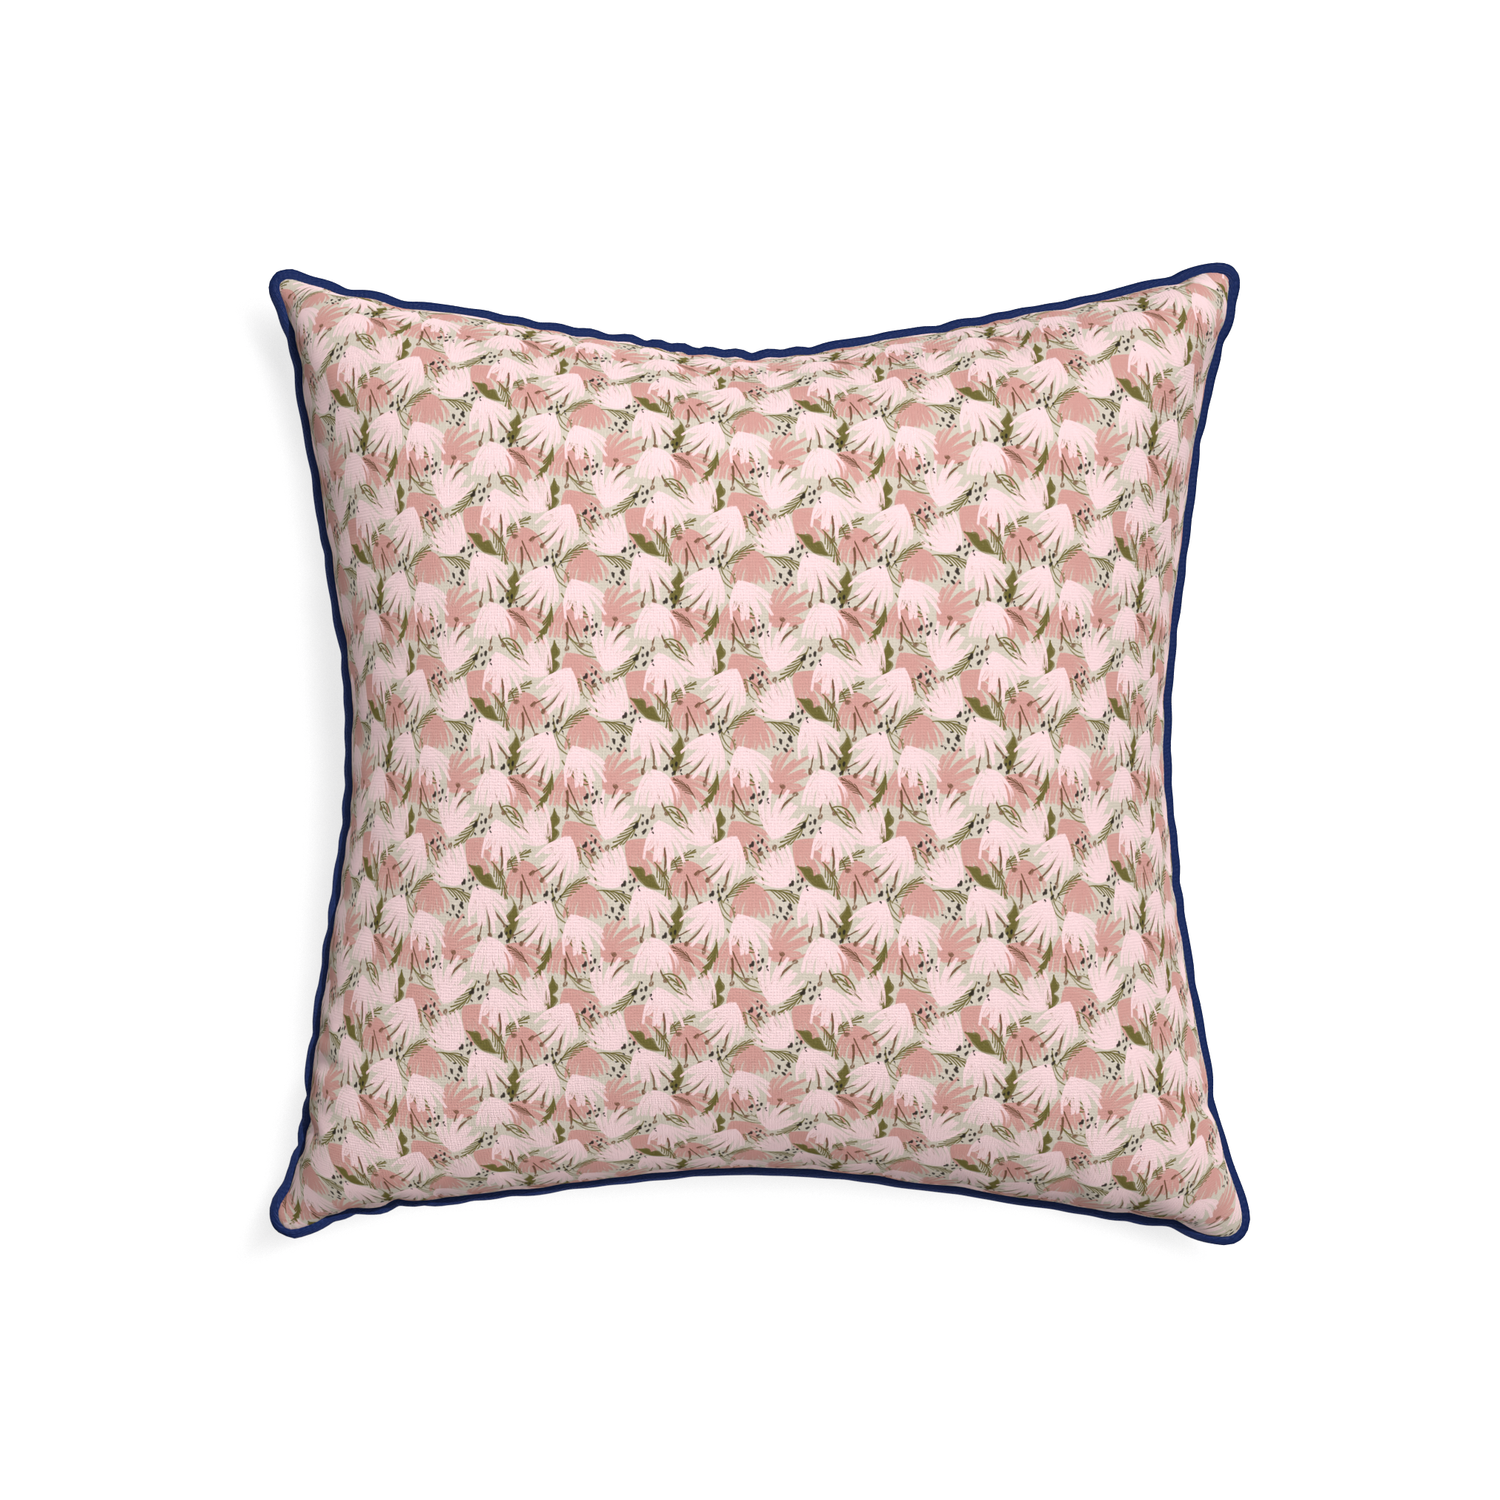 22-square eden pink custom pink floralpillow with midnight piping on white background